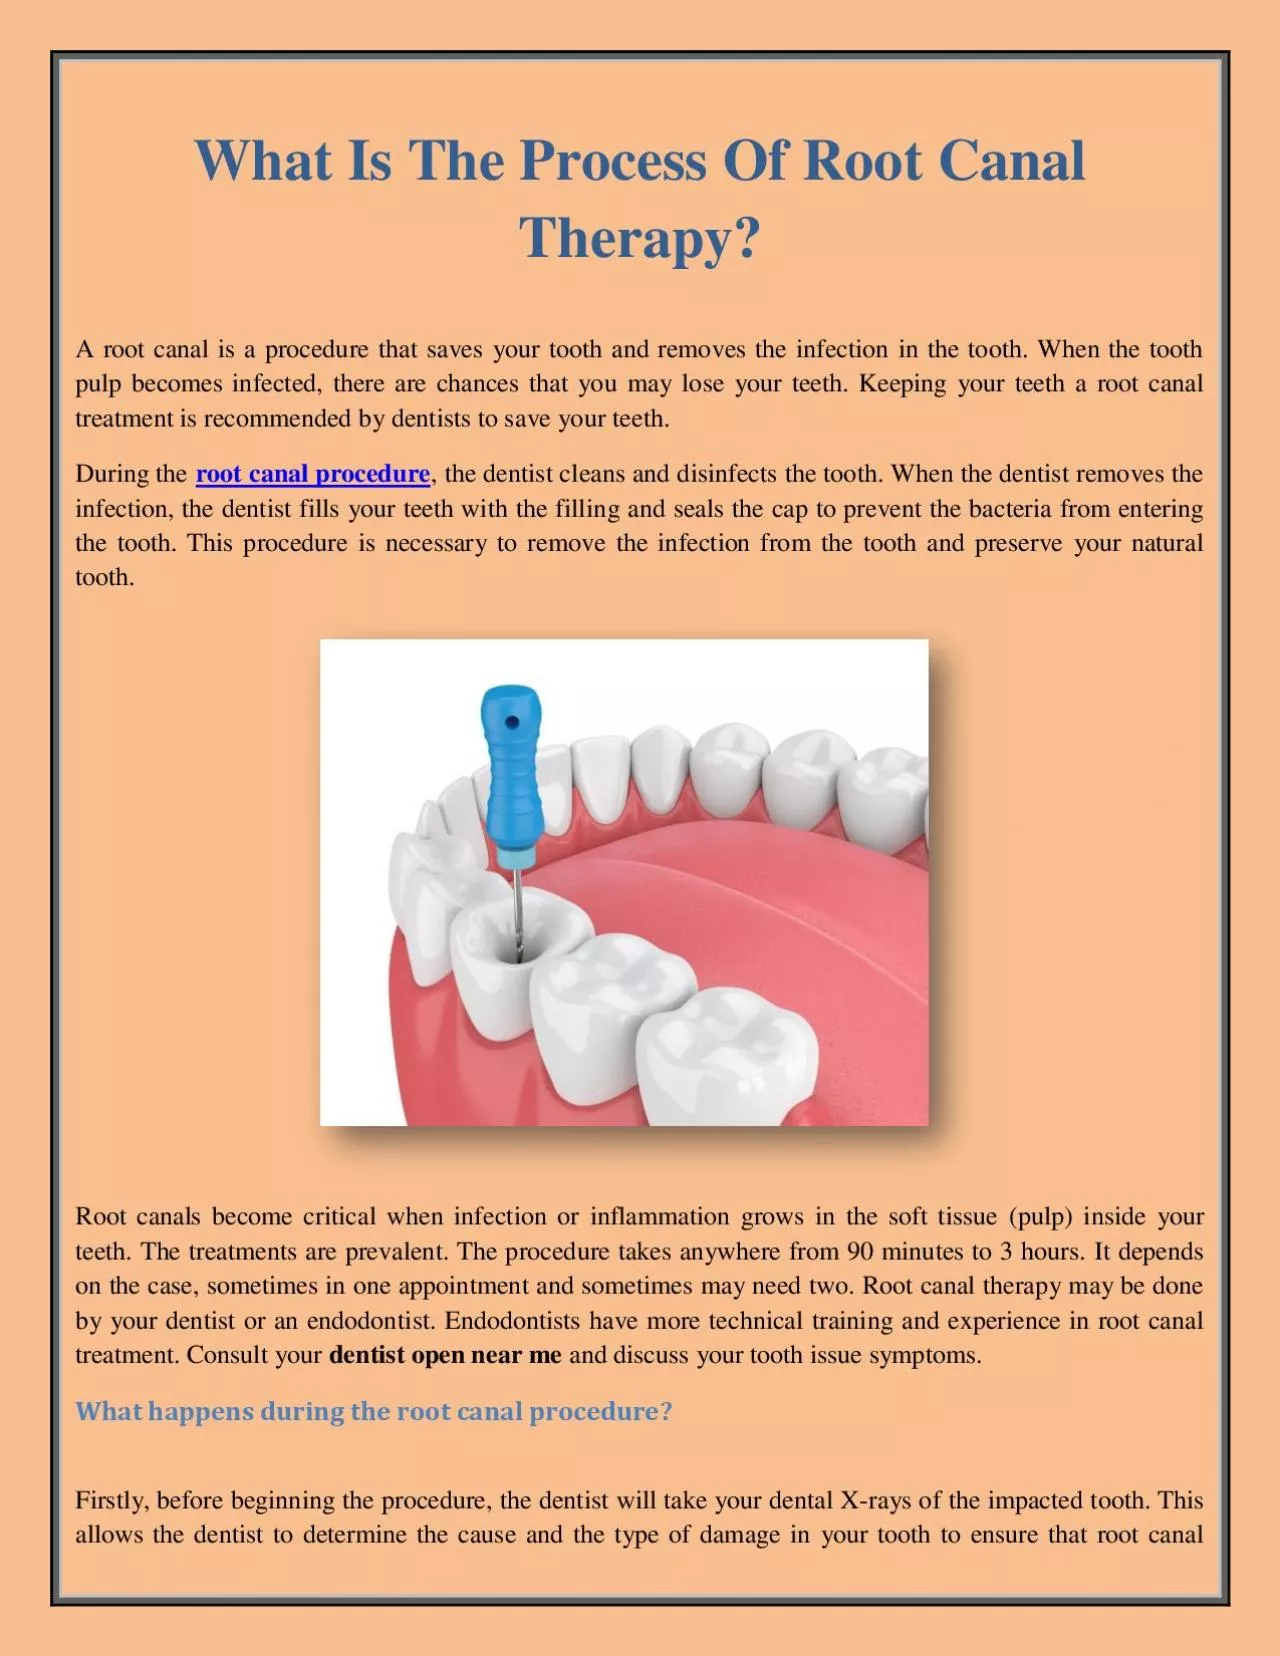 What Is The Process Of Root Canal Therapy?